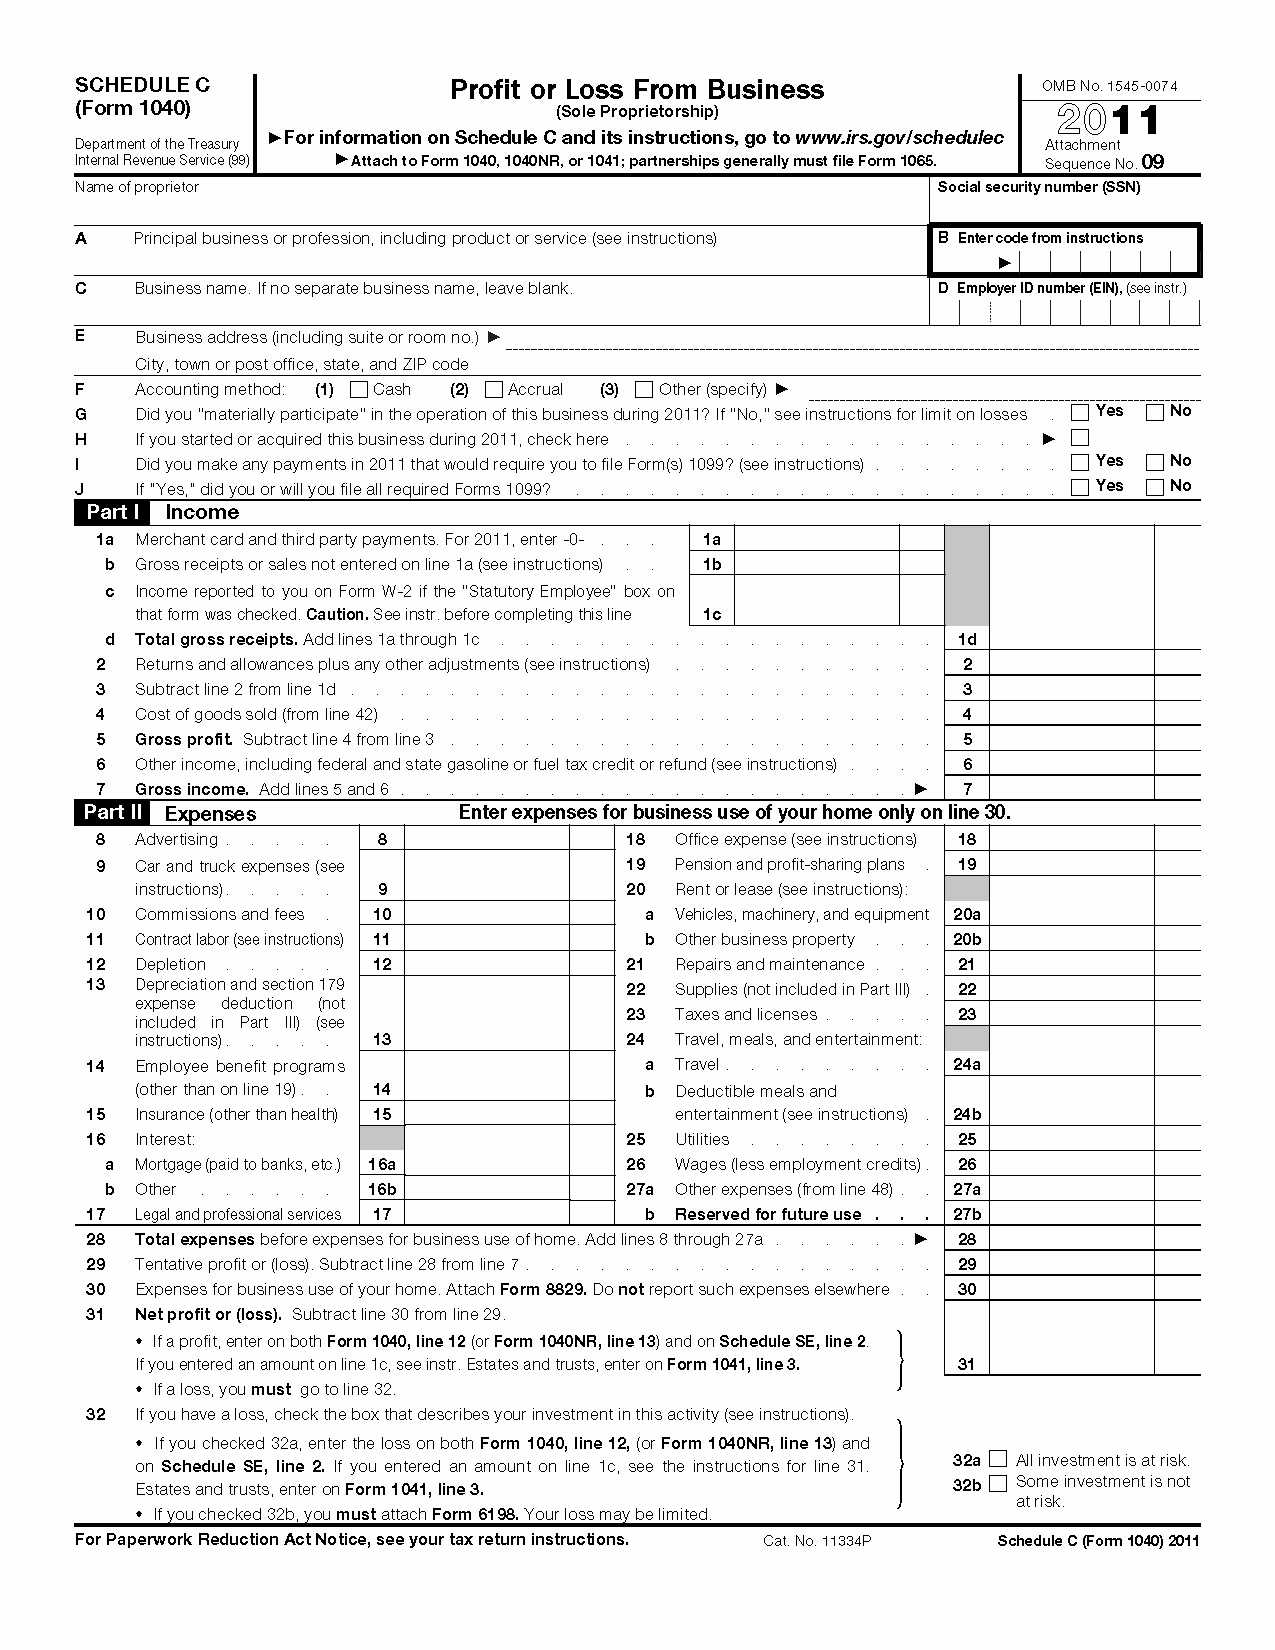 Itemized Deductions Worksheet or Exelent Home Fice Deduction form Image Home Decorating